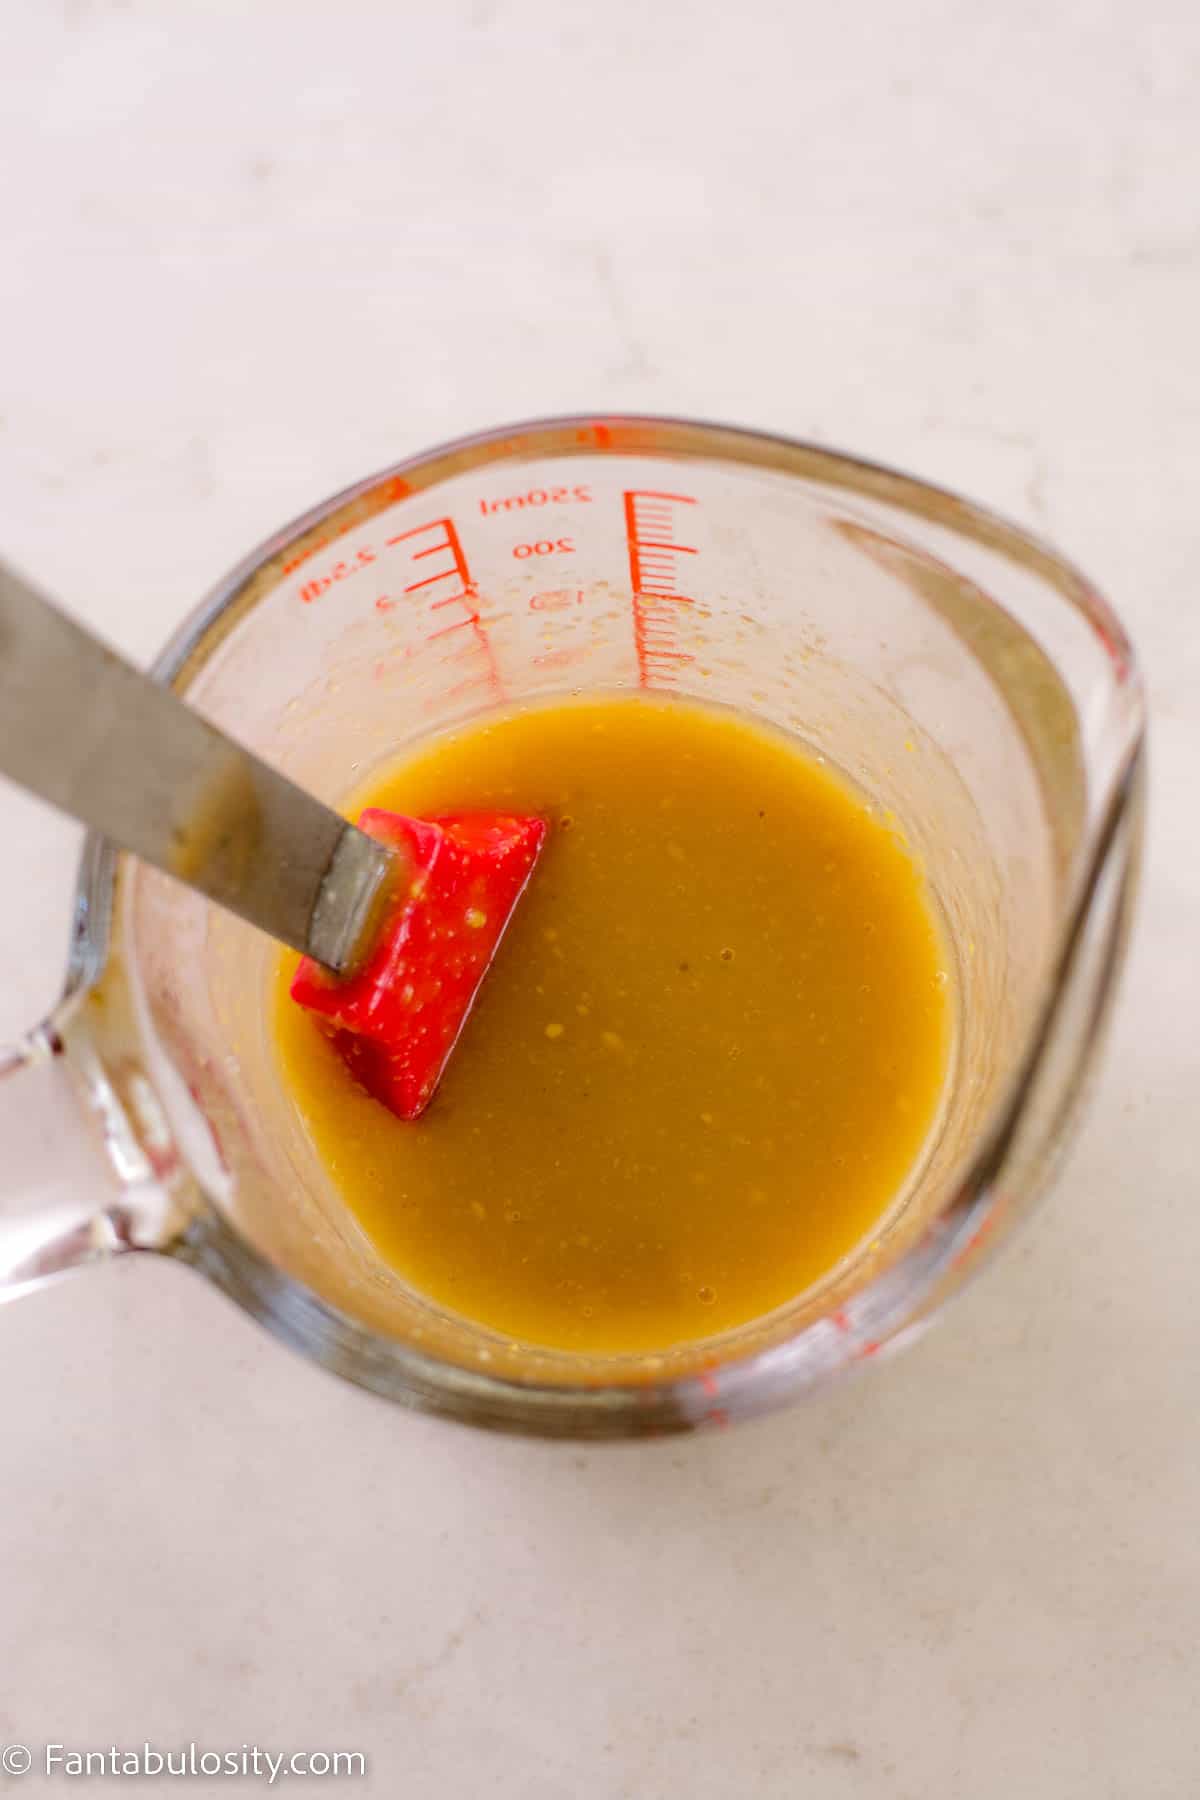 Melted butter and seasonings in glass measuring bowl.